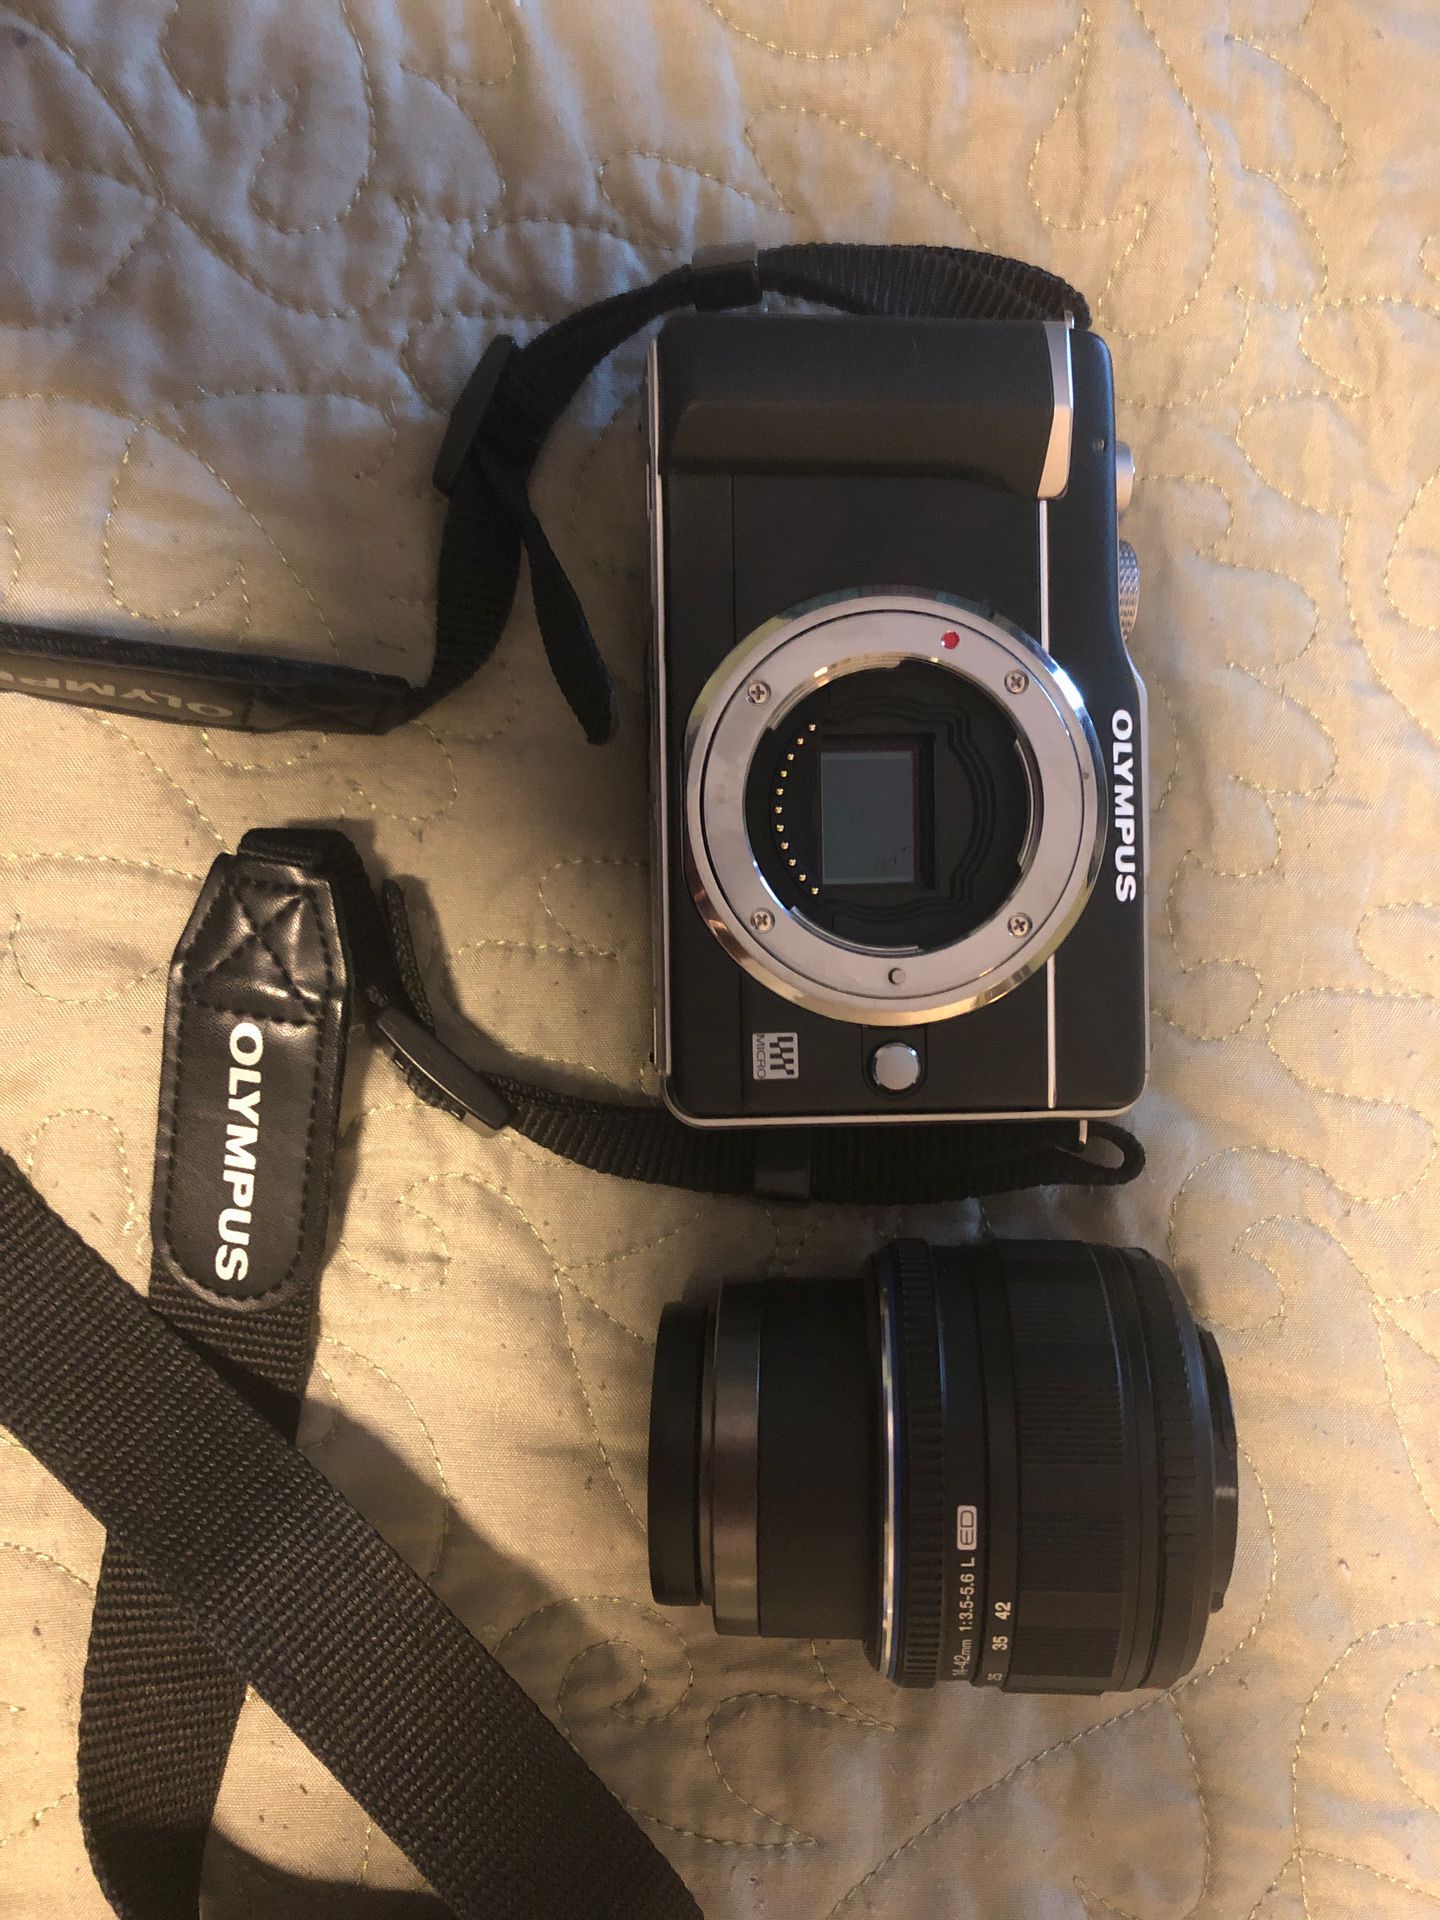 Olympus E – PL1 mirrorless Digital camera used with 14–42 mm lens.